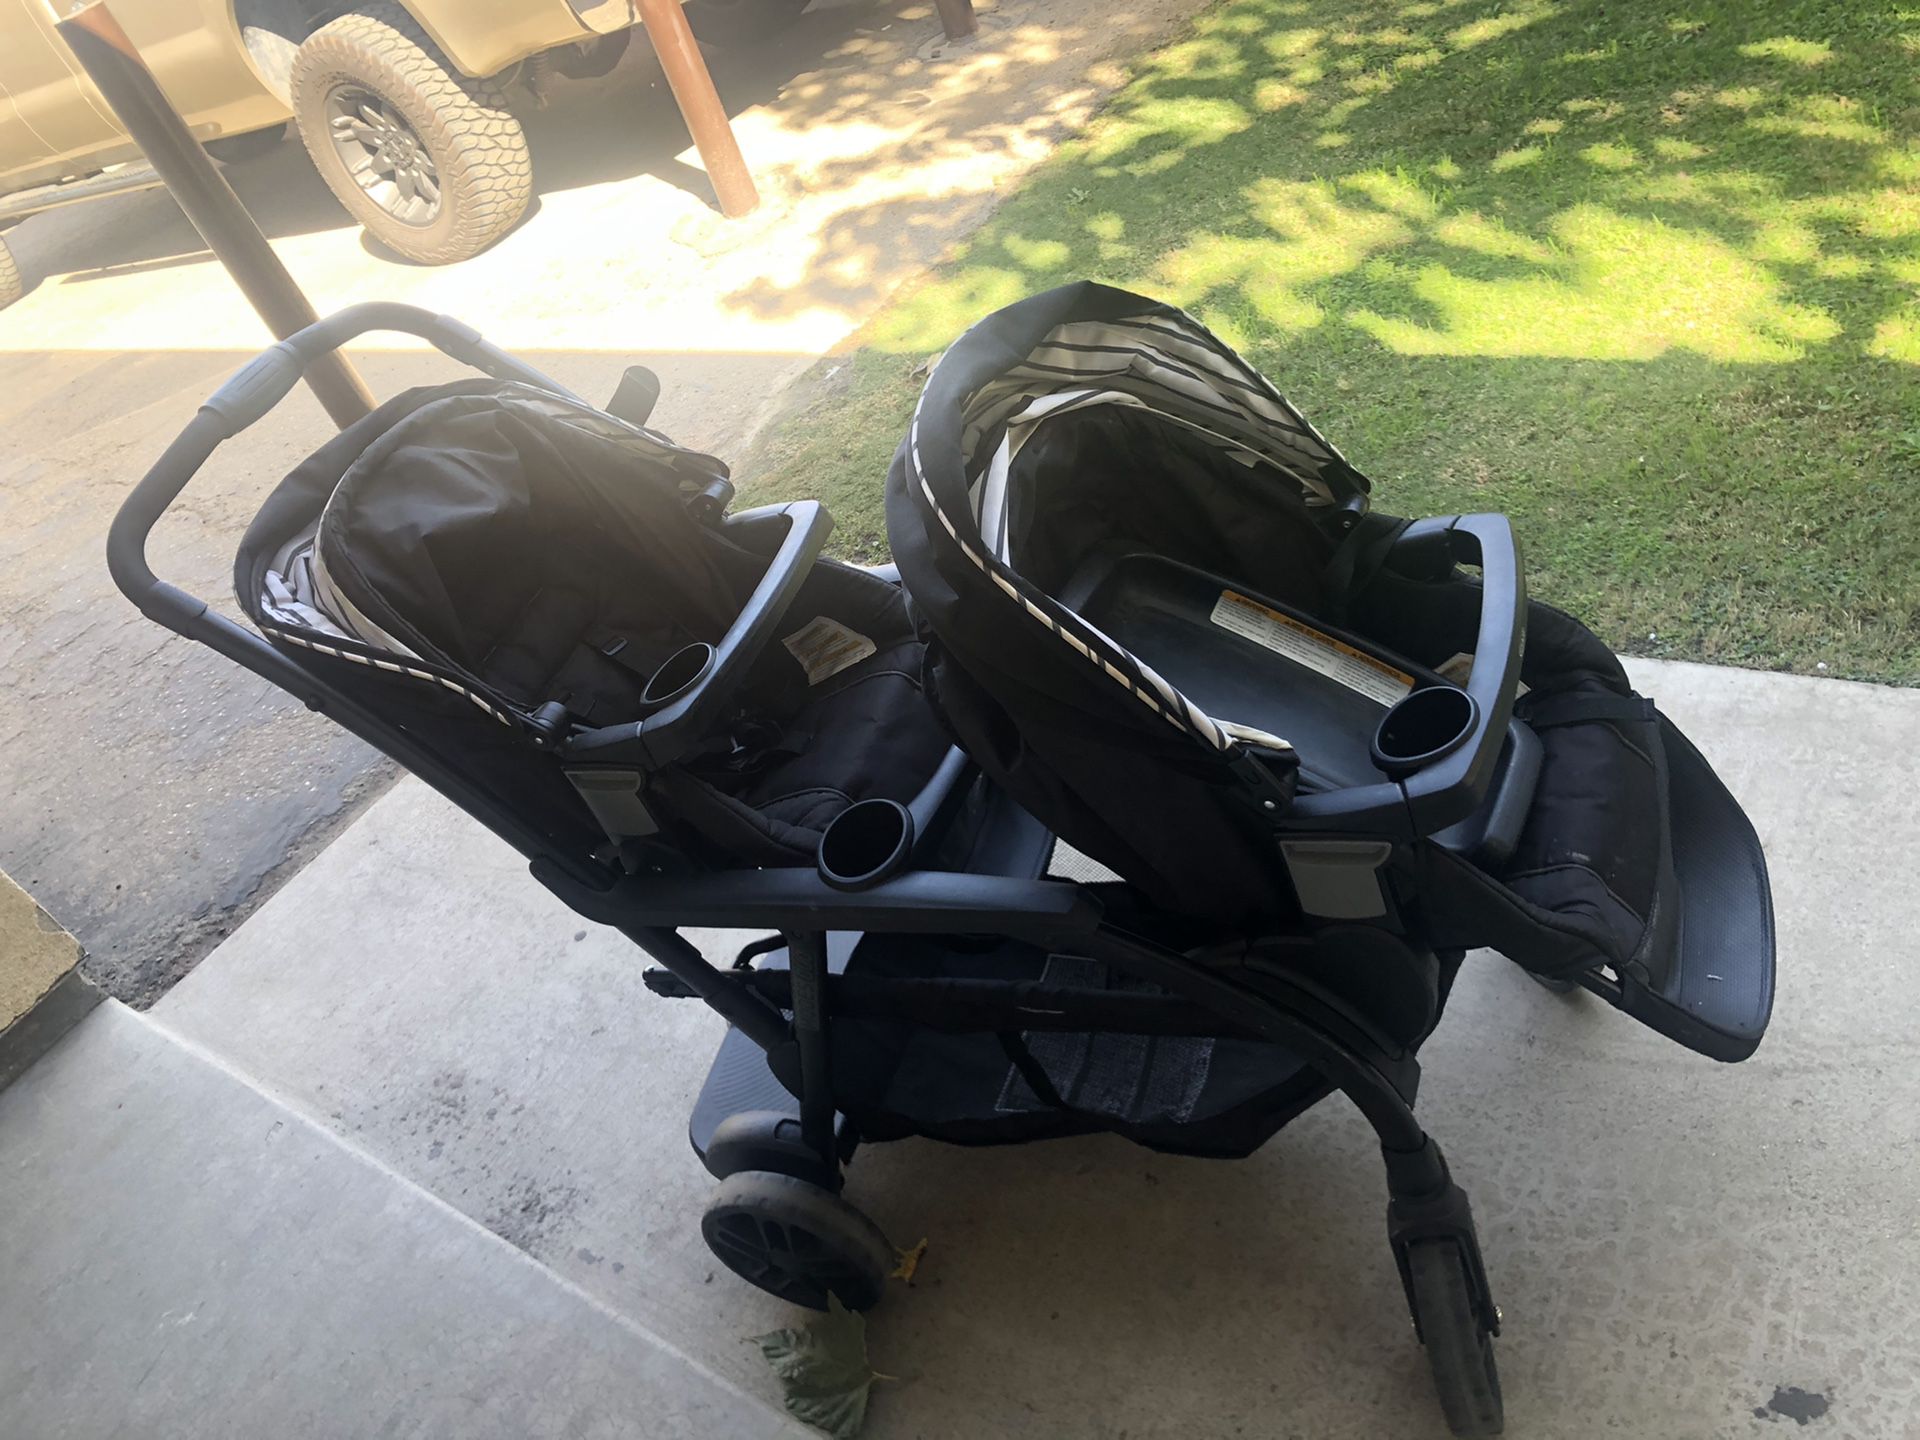 Garco double stroller and car seat